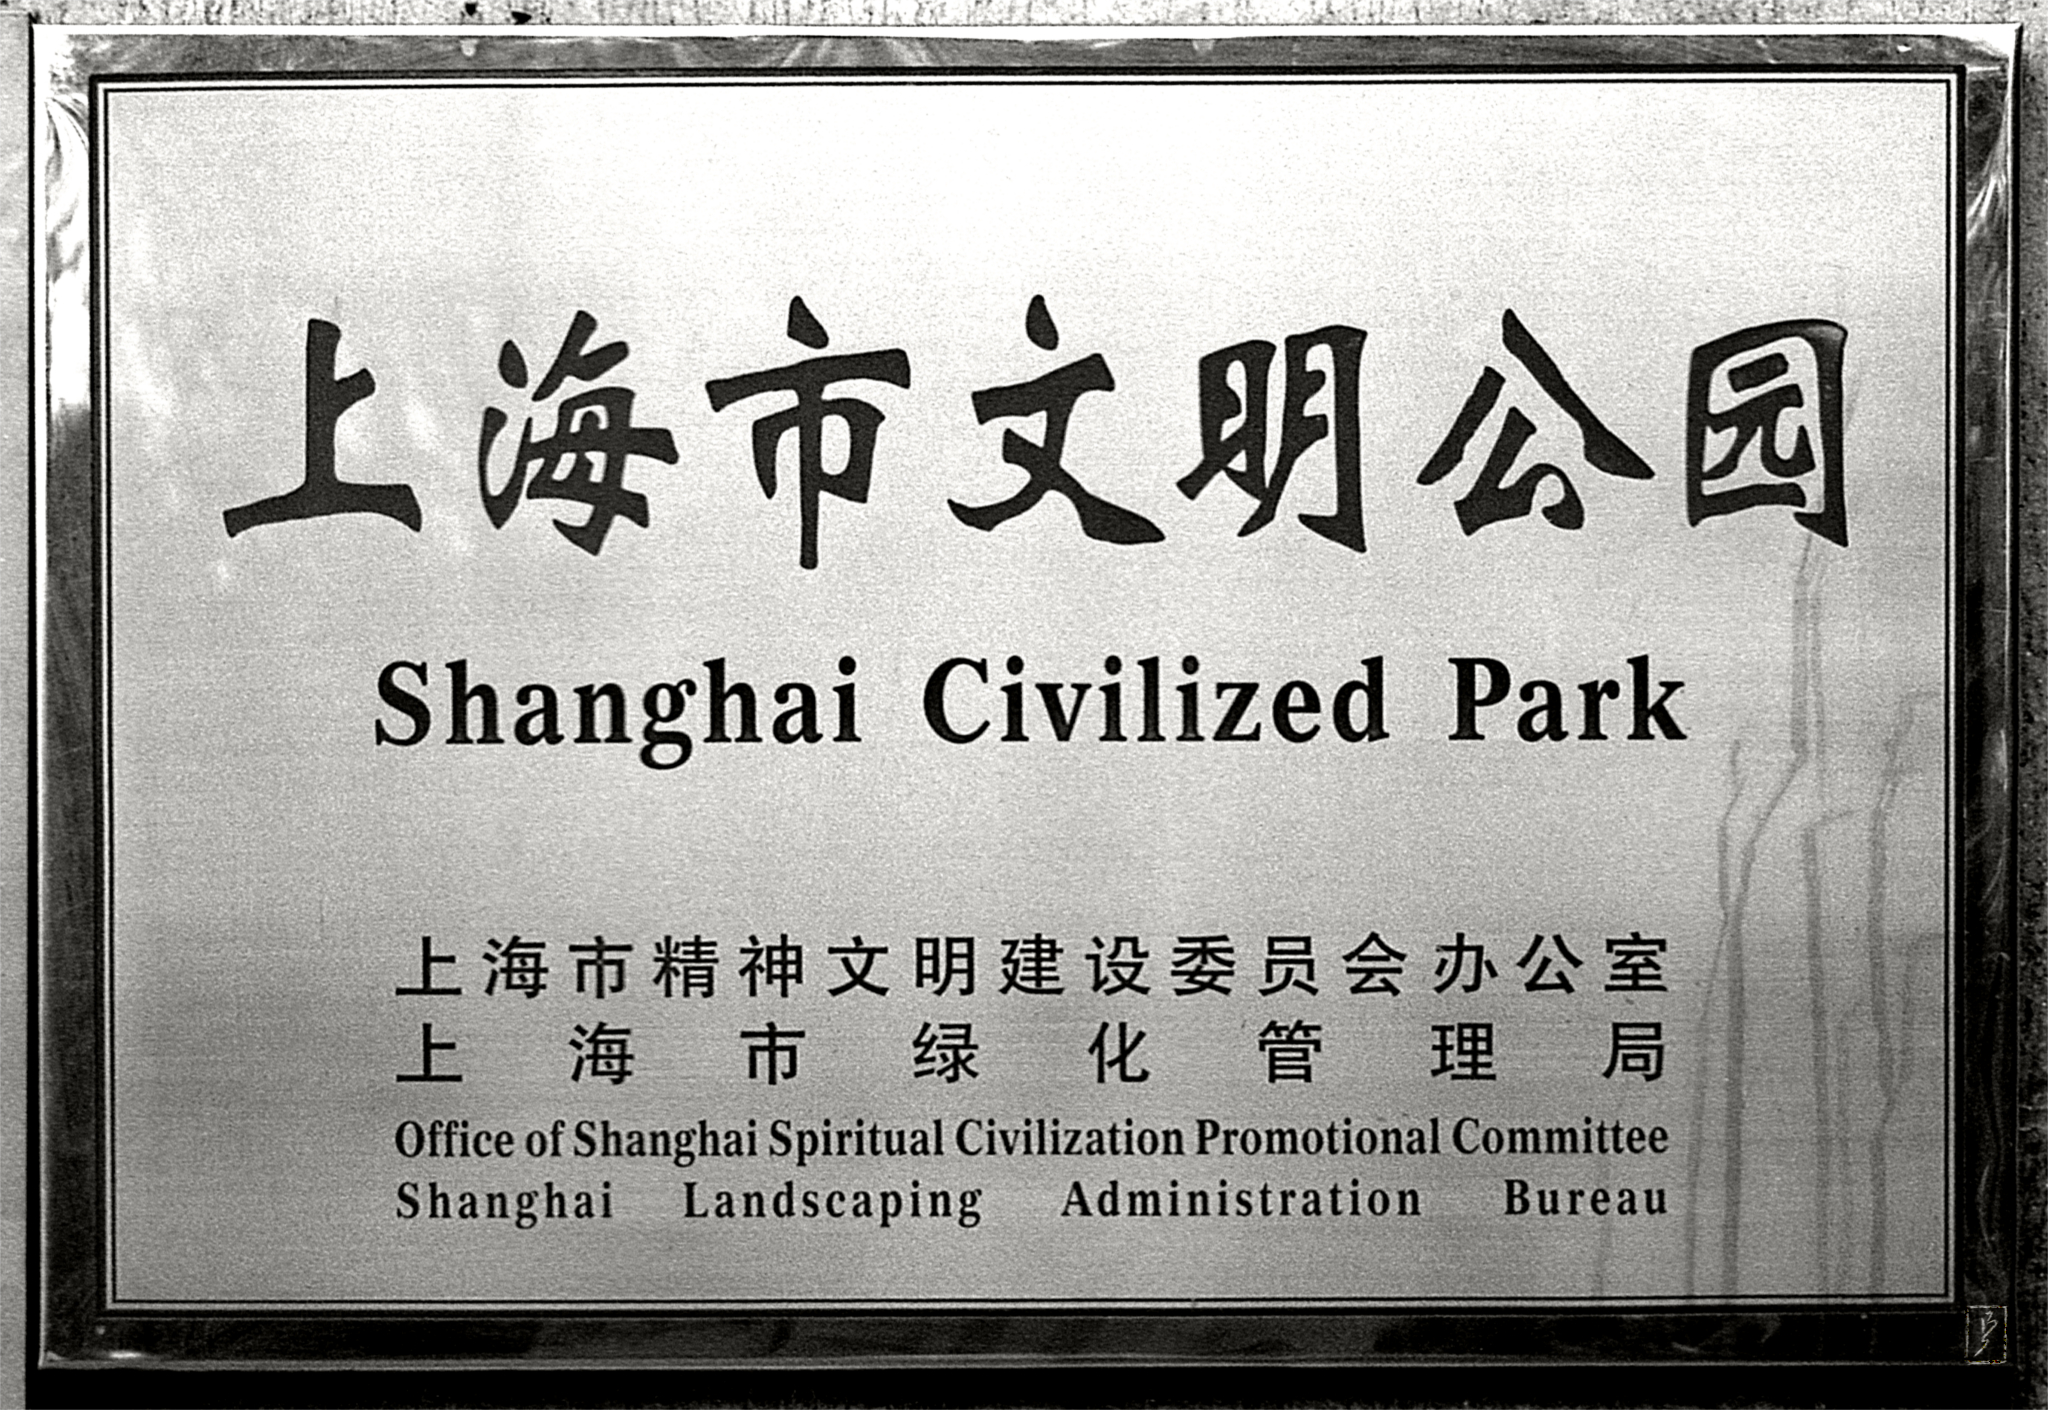 "Shanghai Civilized Park" is not a real park, but an awaard granted to a number of parks in Shanghai, which always proudly display this sign at the entrance. Promotion of "civilized" behaviour was part of the campaigns in the run-up to the Expo 2010, which was held in Shanghai.